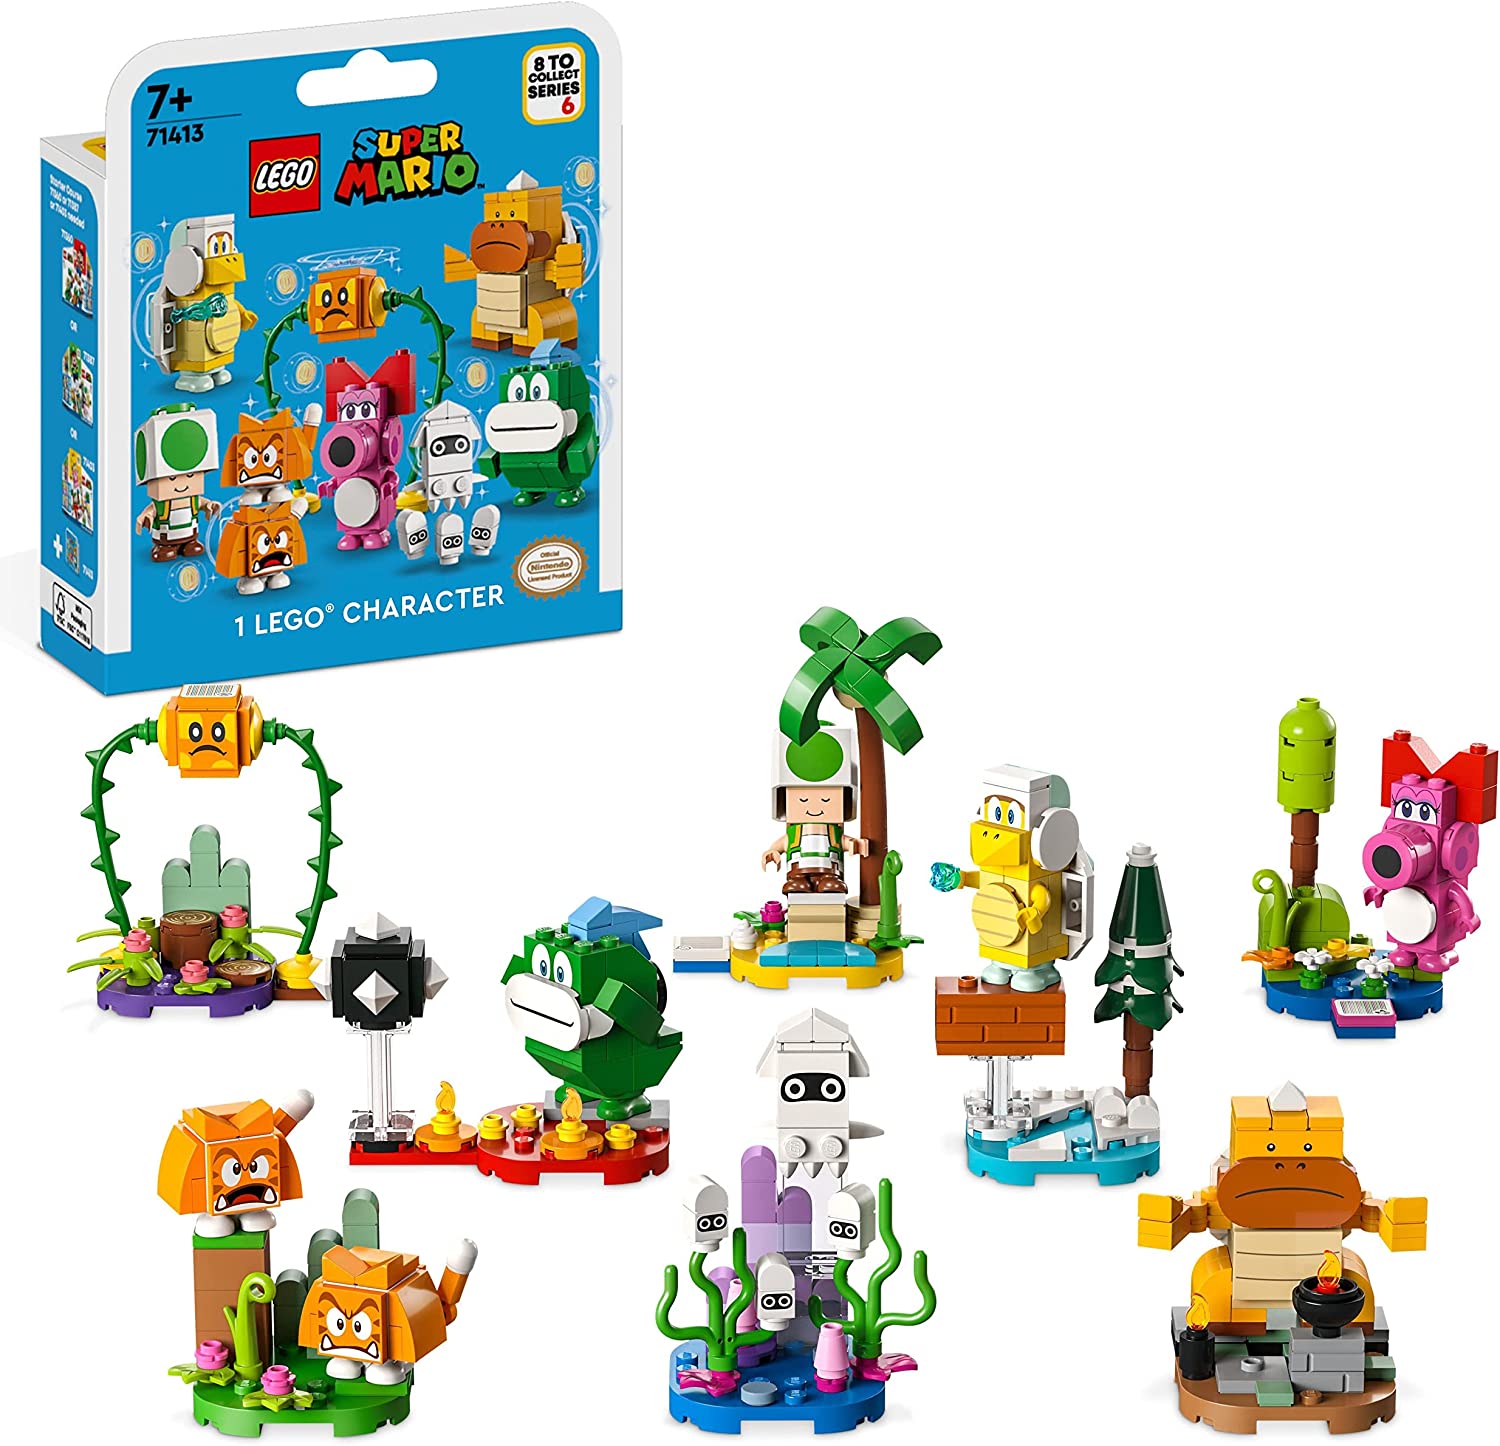 LEGO 71413 Super Mario Characters Pack - Series 6 Collectable Mystery Toy Figures for Kids, Can be Combined with the Starter Pack for More Play Options (1 Style - Random Unit)